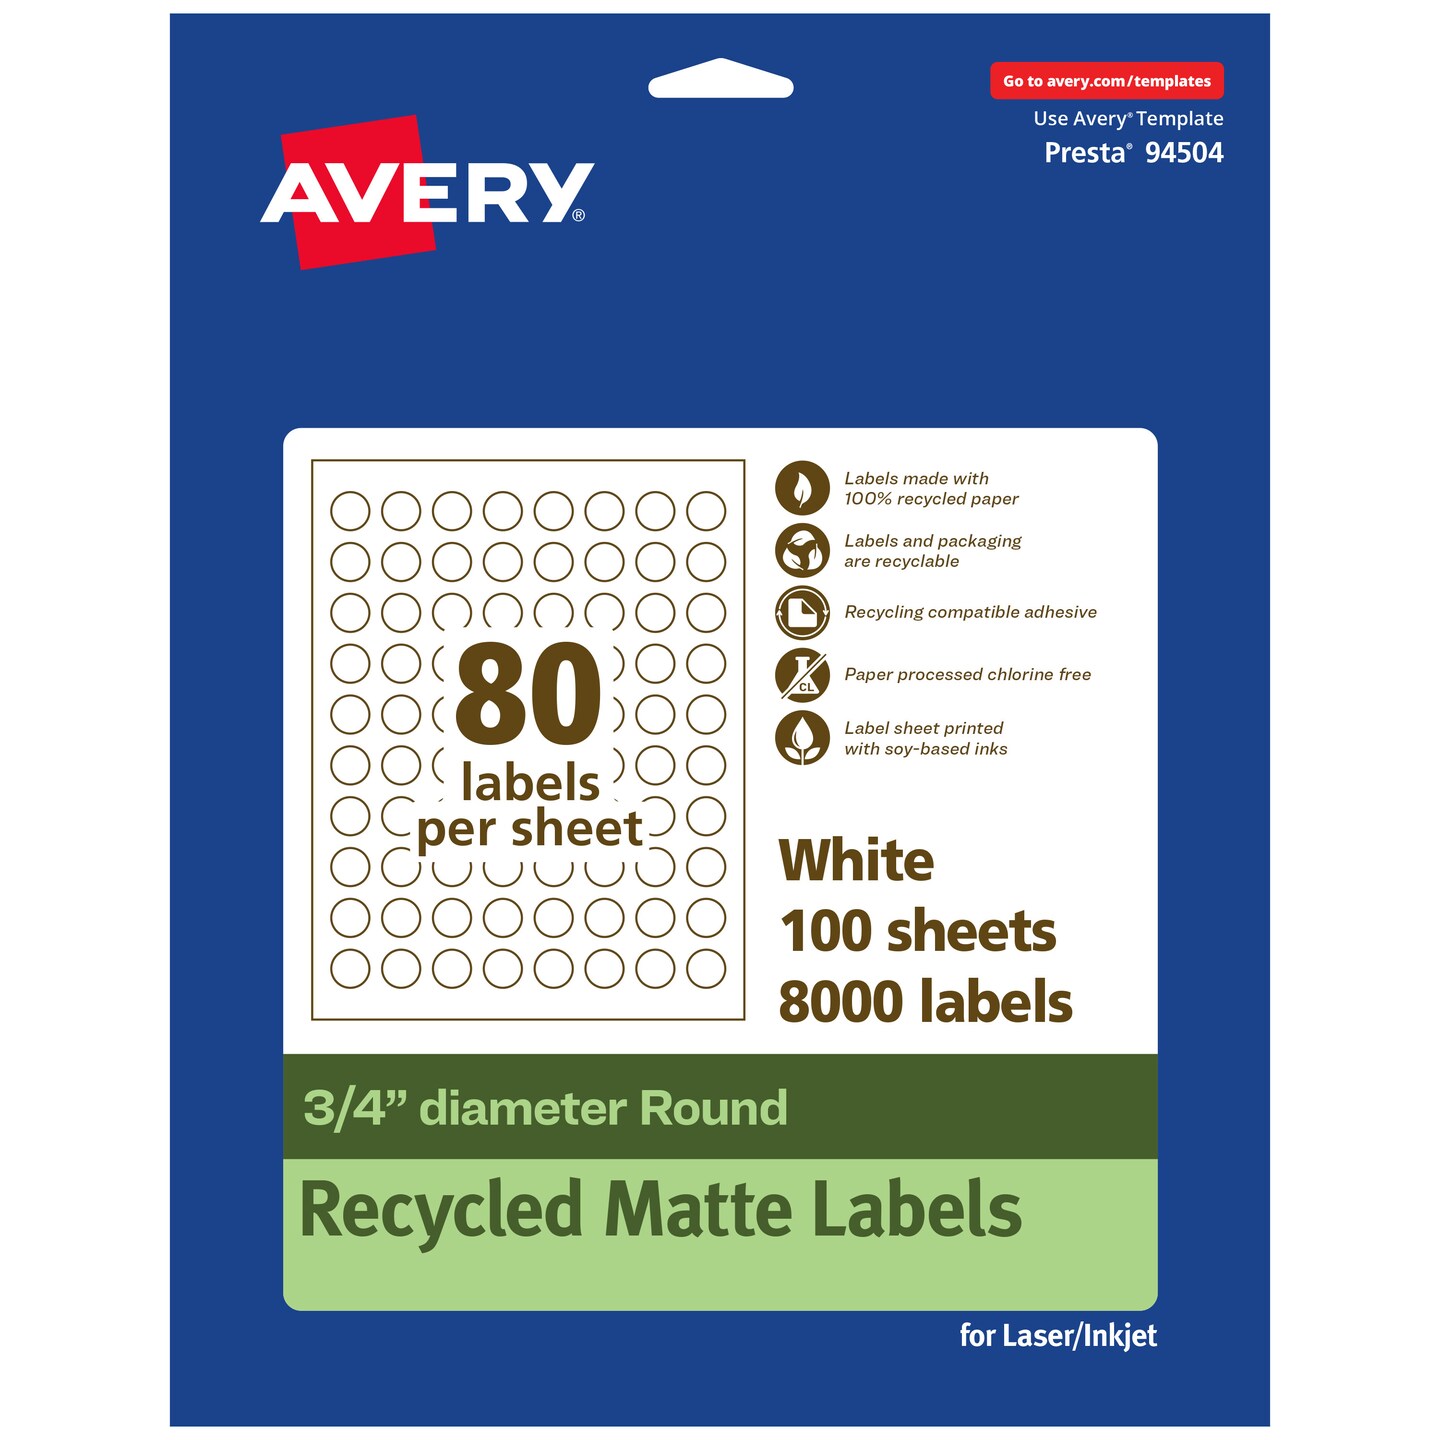 Avery Recycled Matte White Labels,  3/4" diameter Round